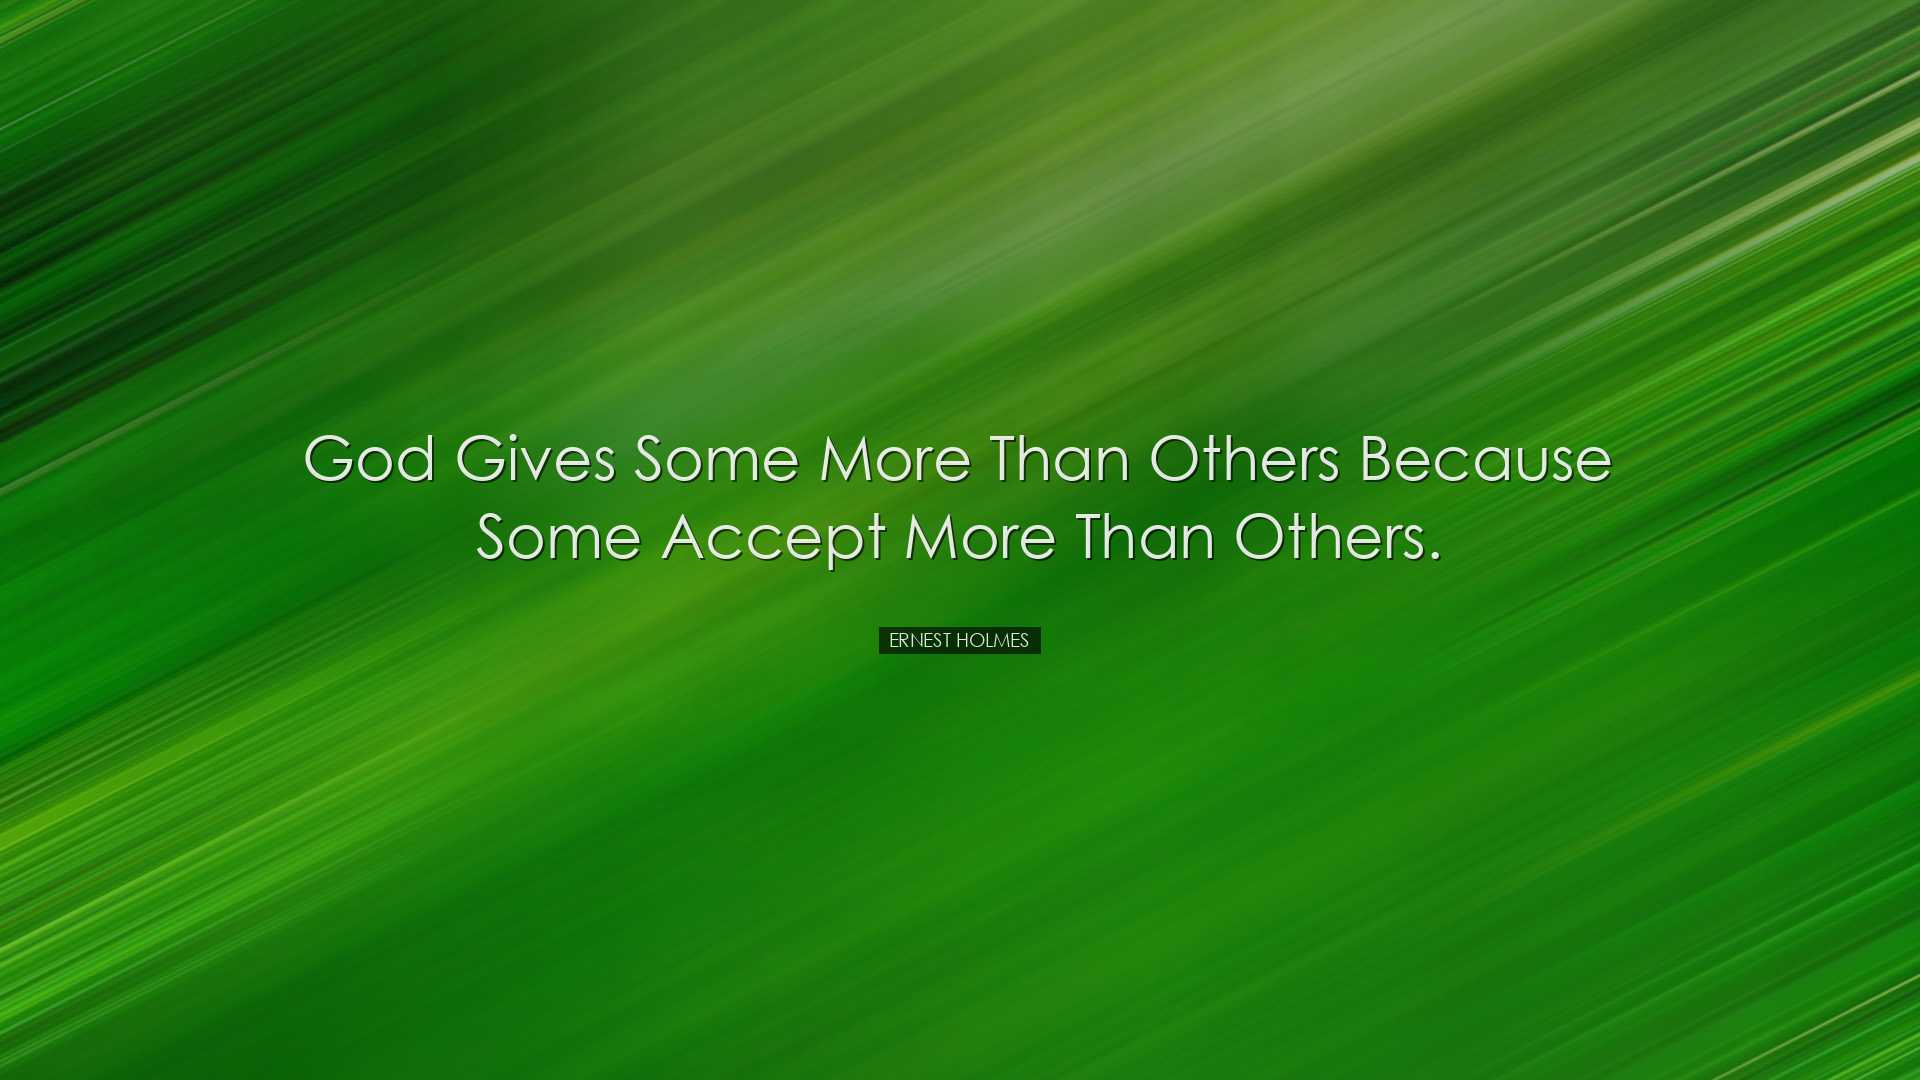 God gives some more than others because some accept more than othe